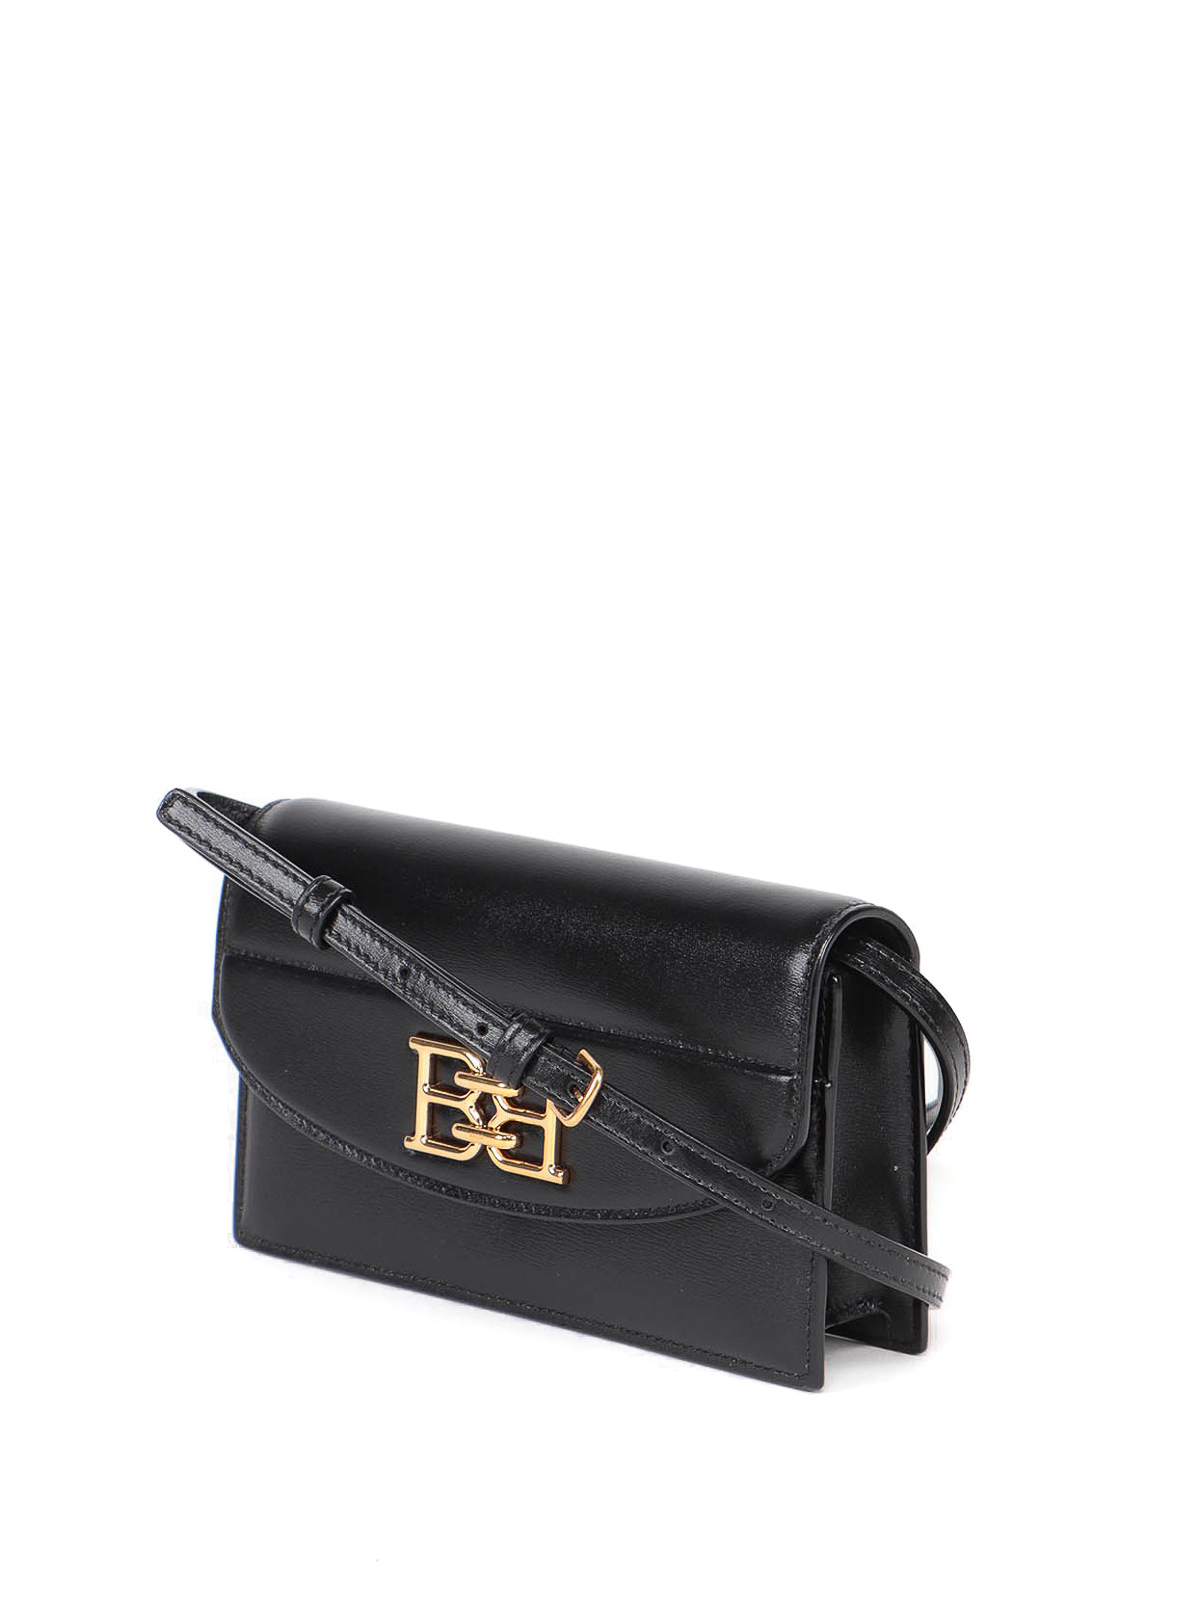 Clutches Bally - Beylor clutch - 6239239 | Shop online at iKRIX